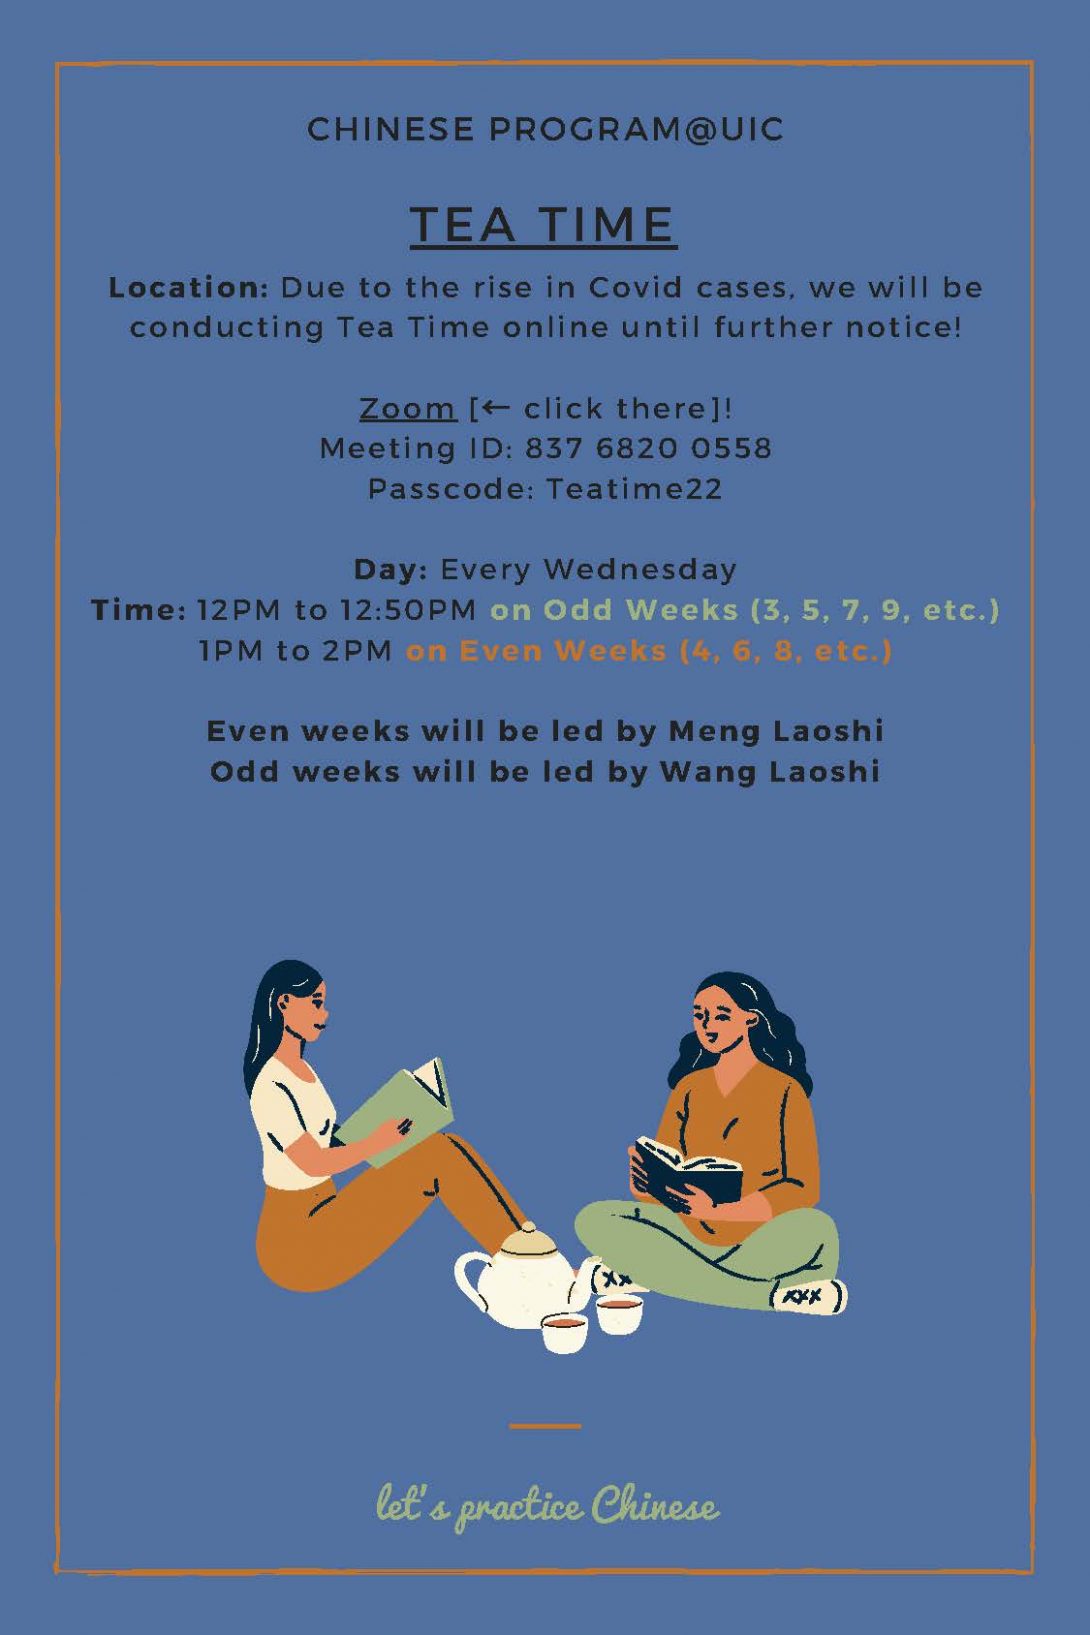 Flyer for tea time event